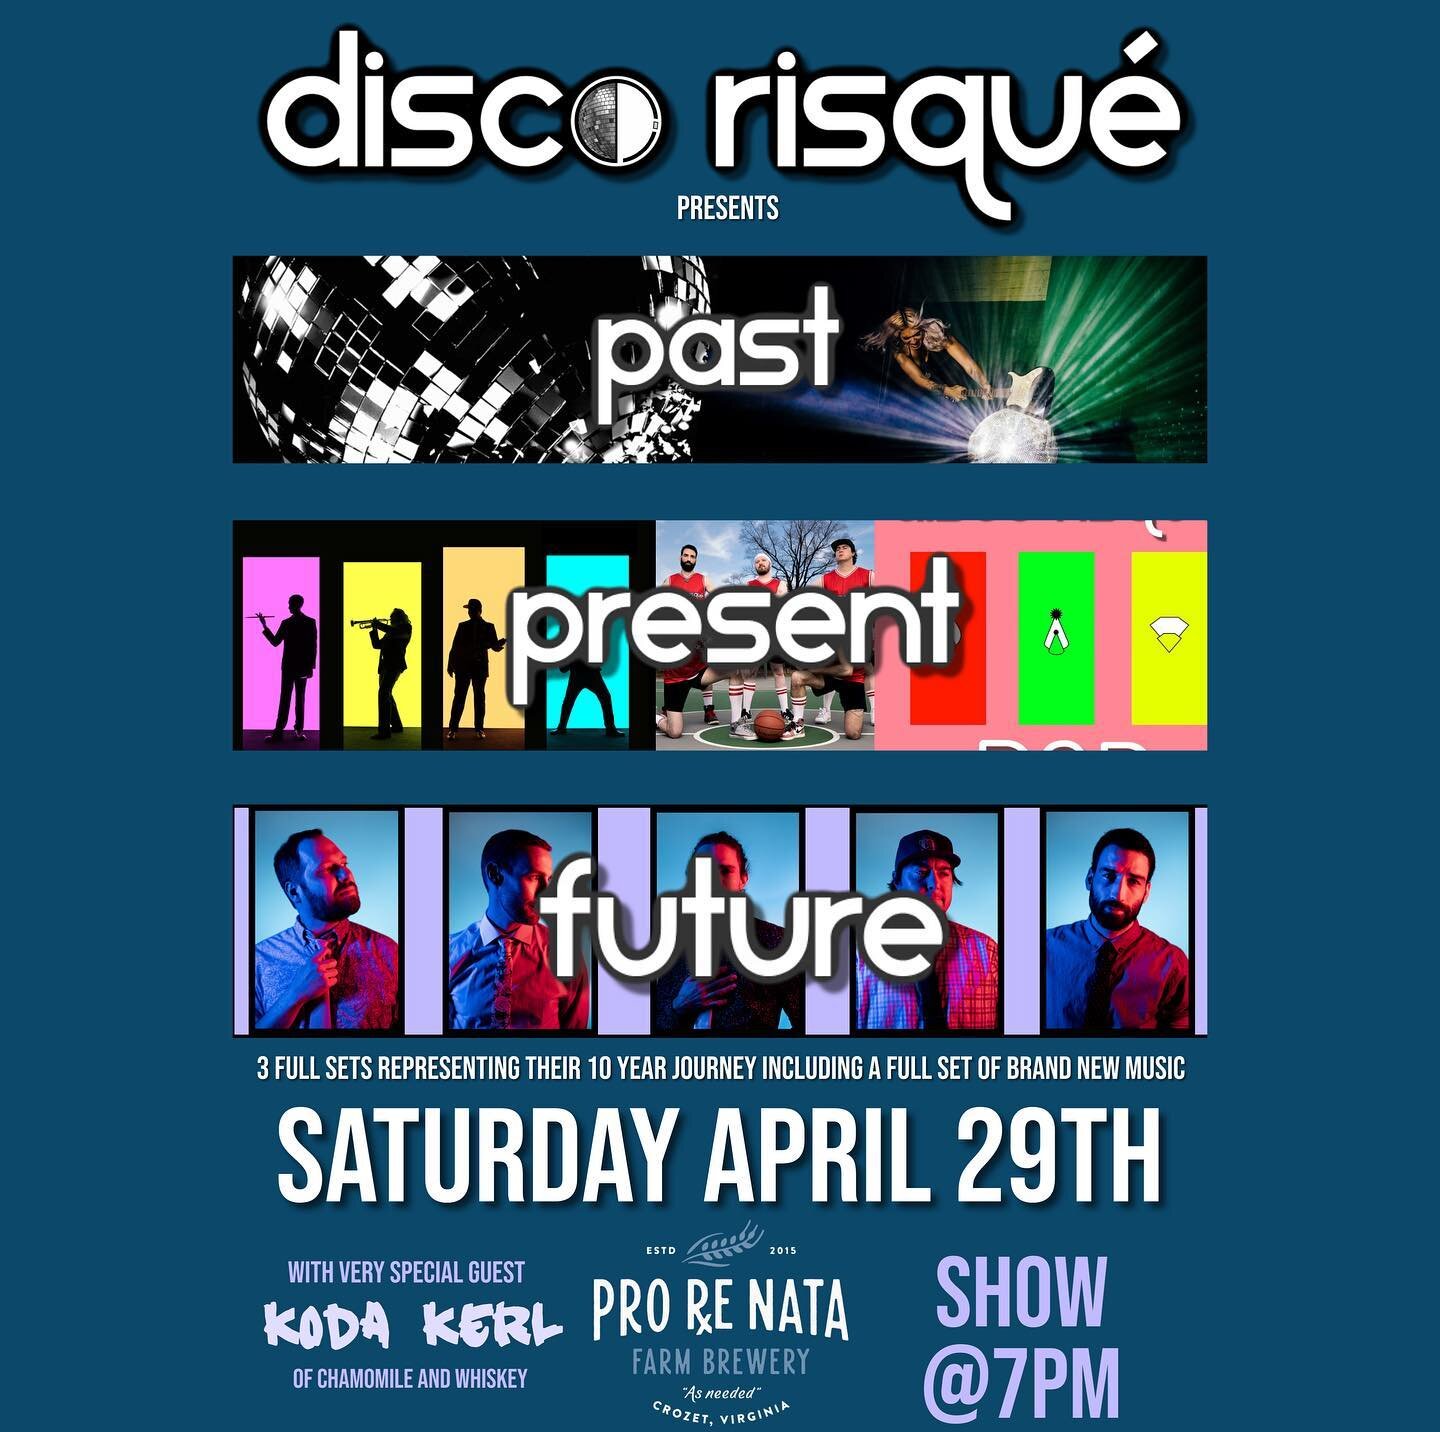 PRESENTING DISCO RISQUE: PAST, PRESENT, AND FUTURE!
.
We&rsquo;ll be returning to @prorenatabrewery on 4/29 to play a very special show!  3 sets of music that captures the different eras of your beloved DR boiz.  One set from our musical beginnings, 